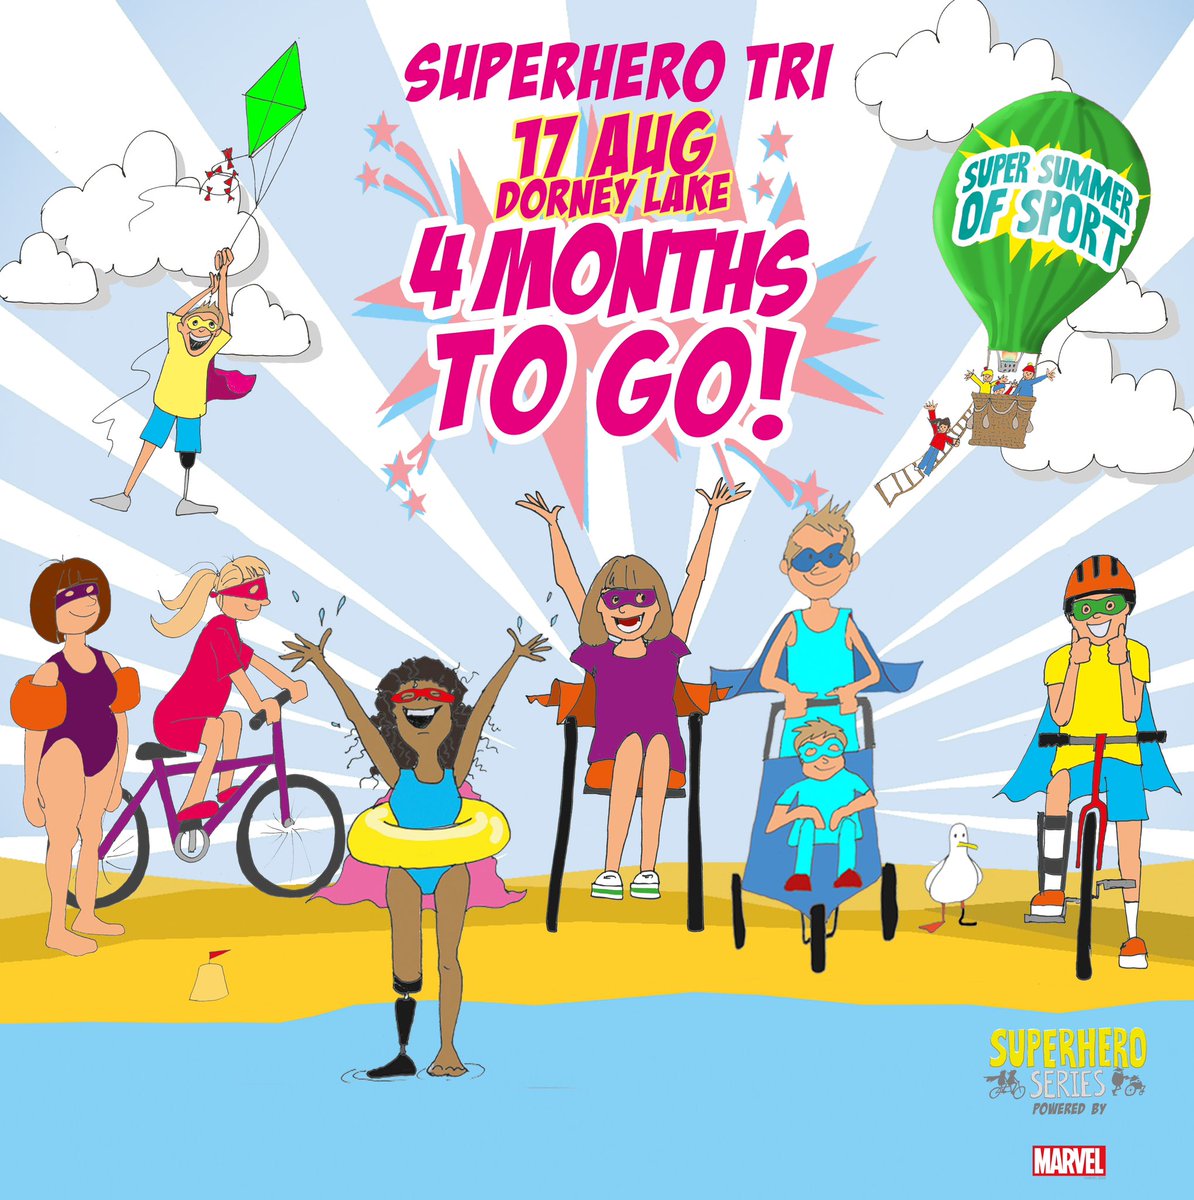 KAPOW!! Yes Superheroes & Sidekicks its only 4 MONTHS TO GO & we will see the worlds greatest display of Superpowers!! SIGN UP & SAVE THE DAY!! superheroseries.co.uk #findyourpower